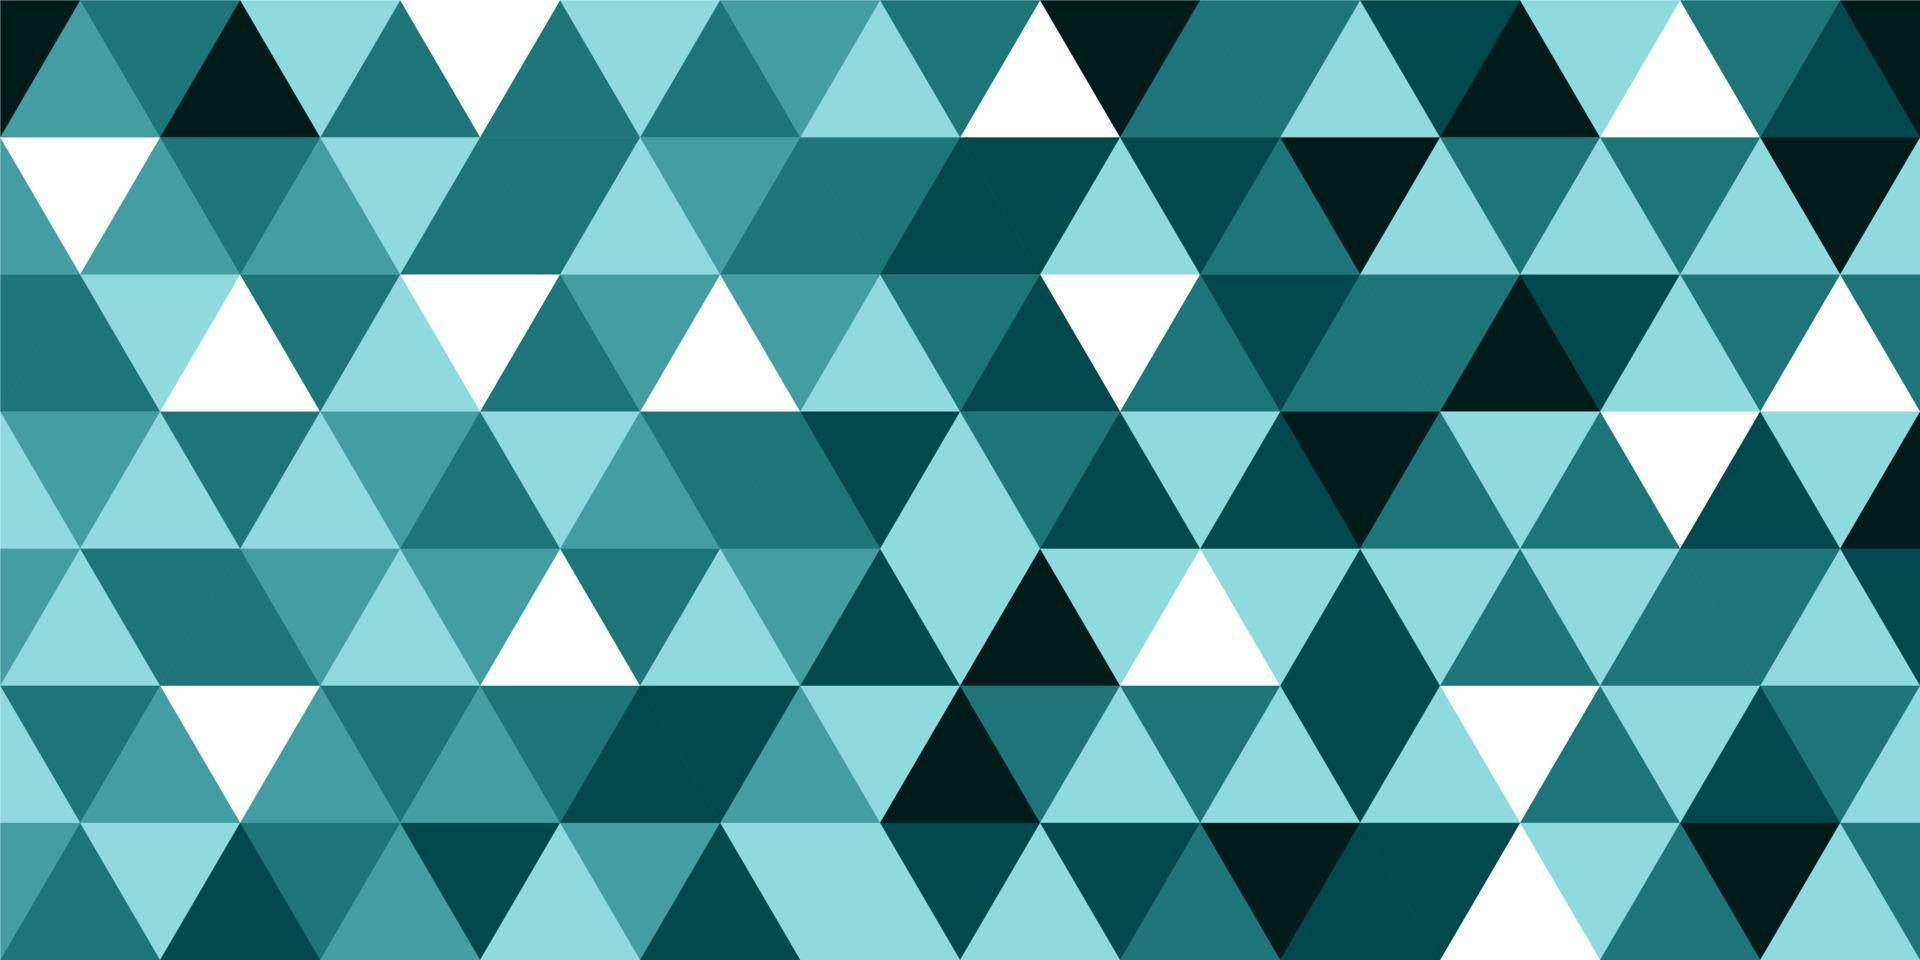 Free background Pattern. high quality Vector